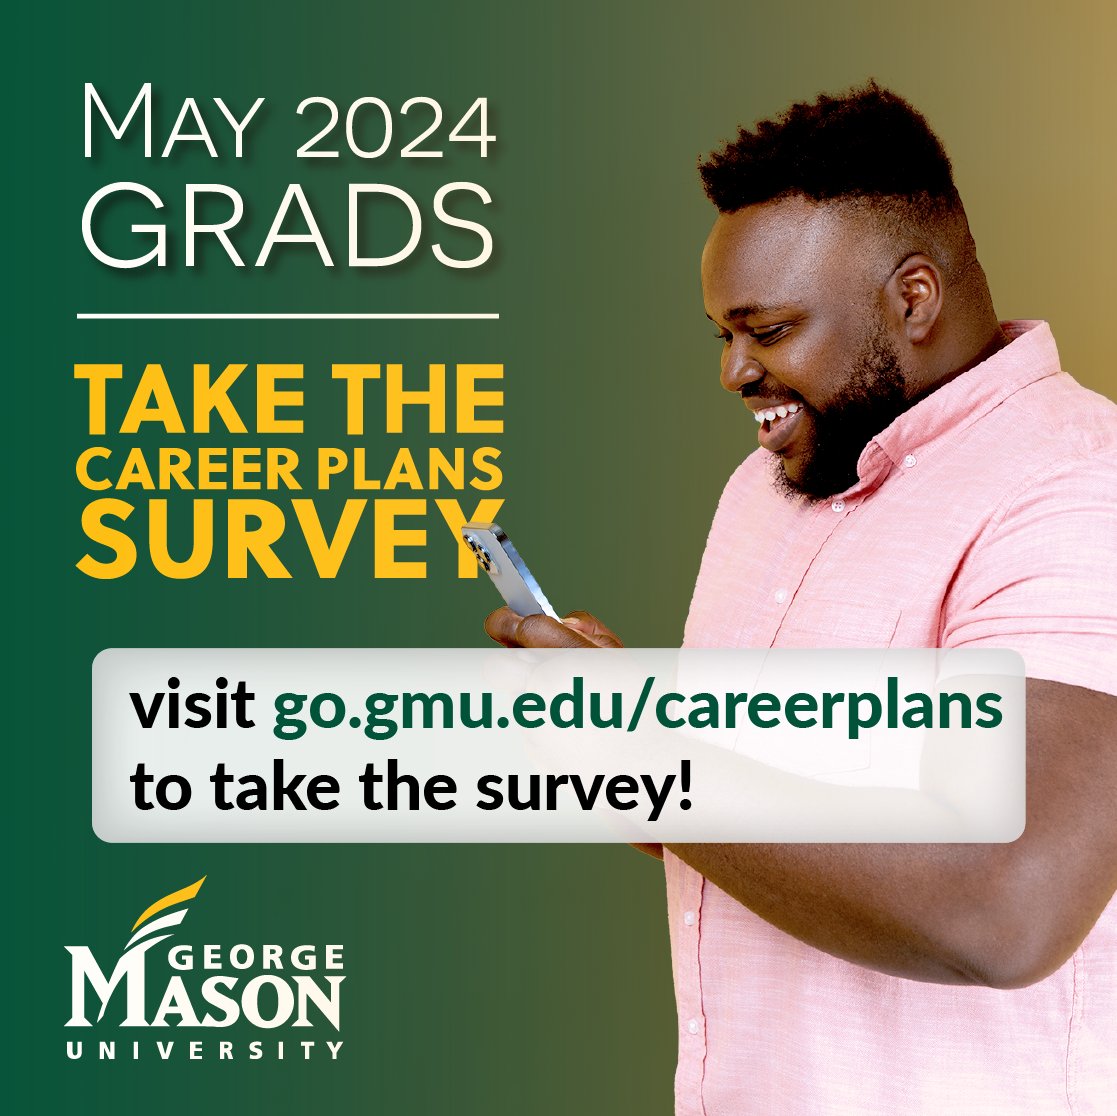 Calling all May 2024 graduates - don't forget to take the Career Plans survey! Best wishes to all of you as you begin your career journeys.
#careerplans @masoncareer